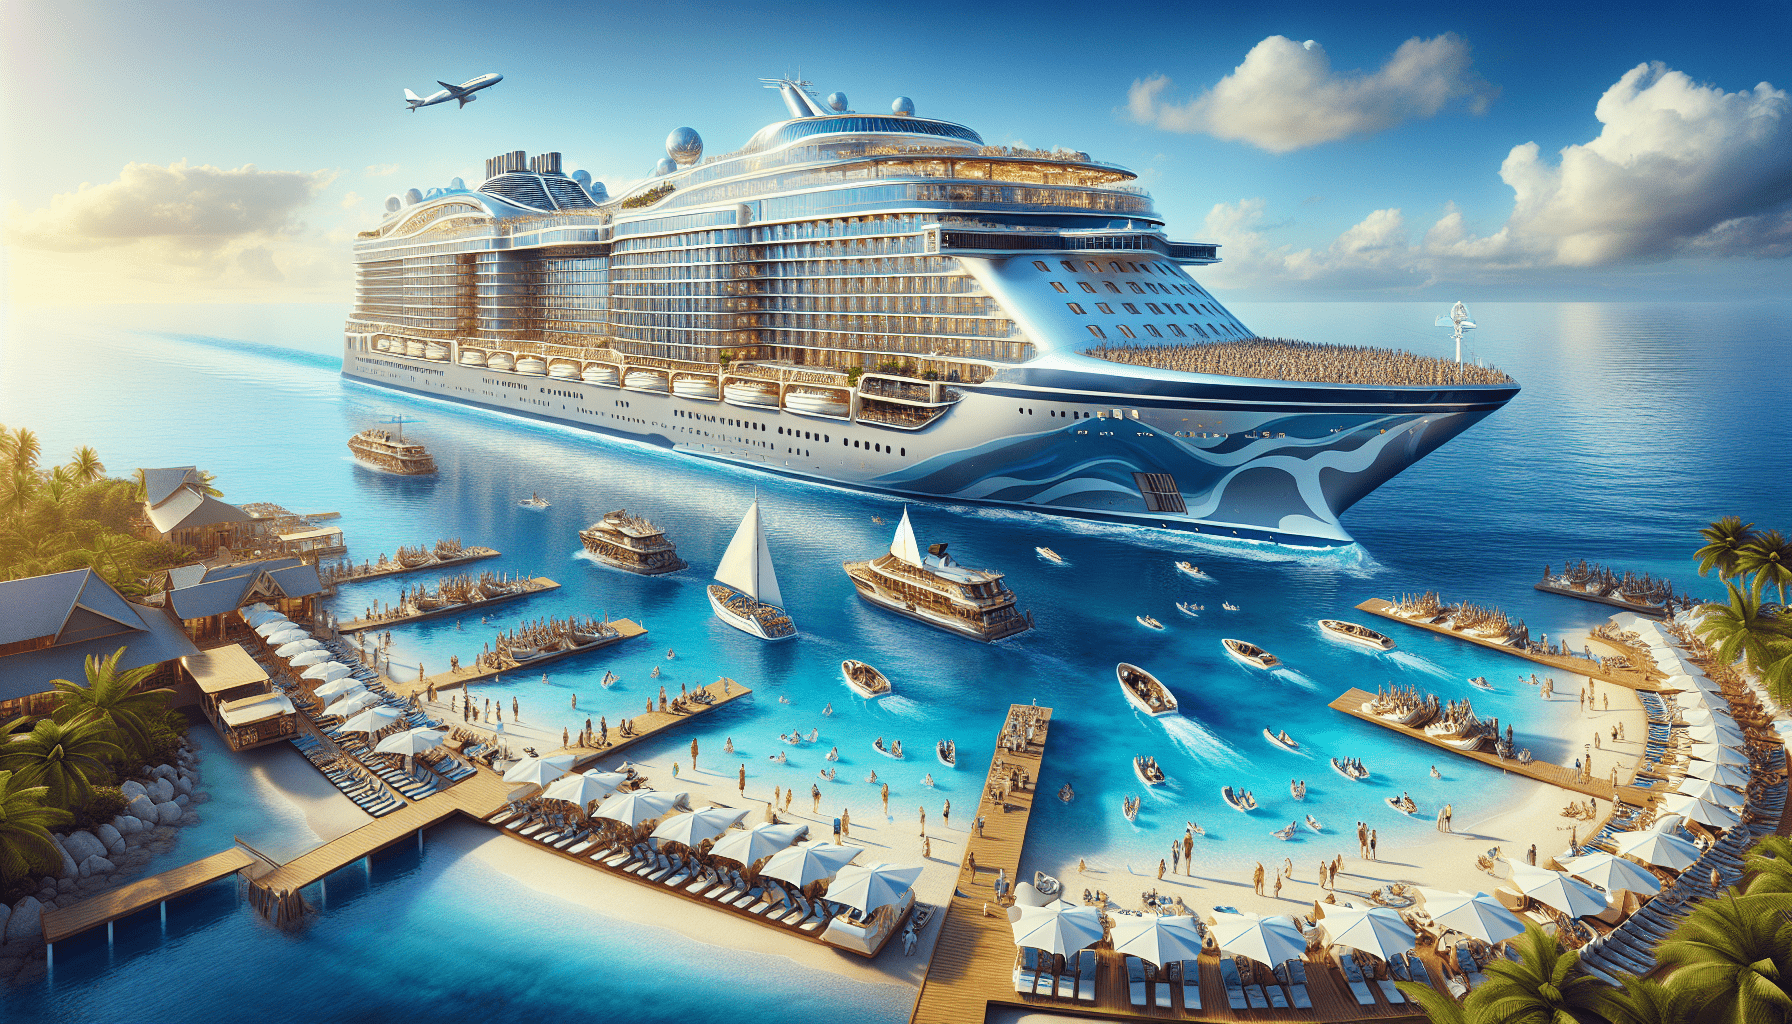 What Is The #1 Cruise Line In The World?